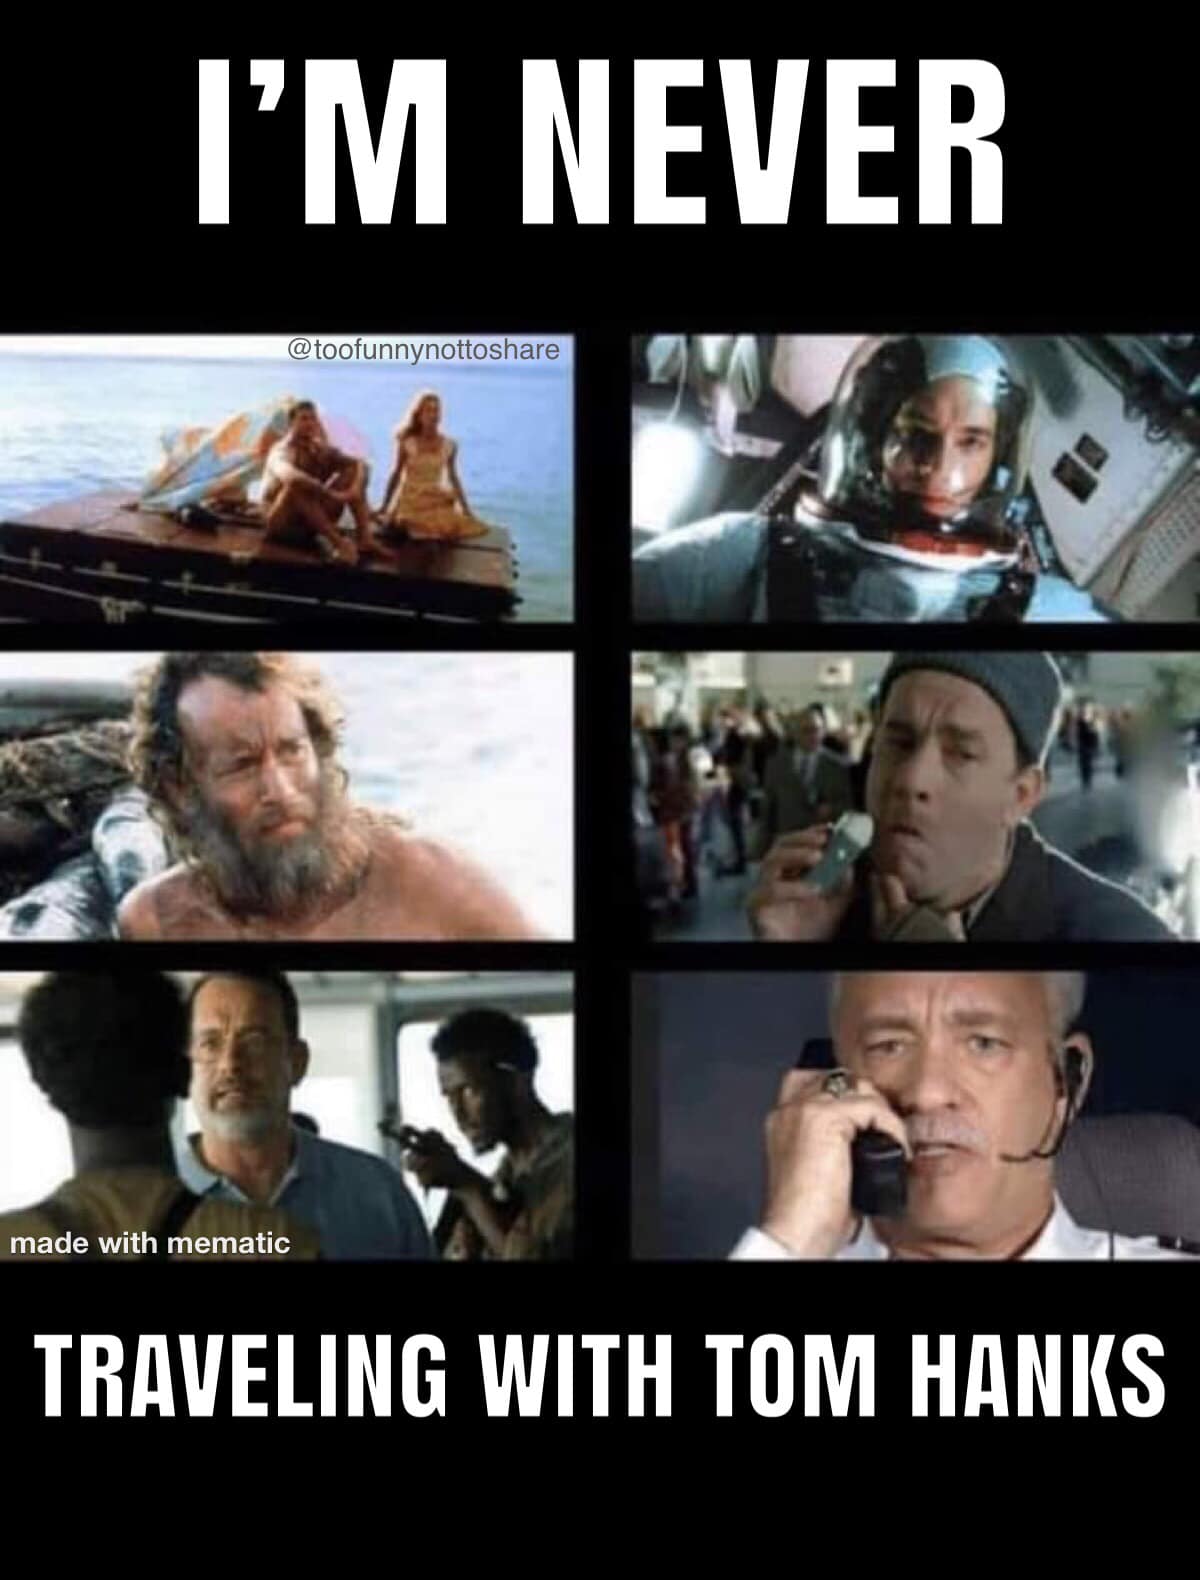 Movie memes - photo caption - I'M Never made with mematic Traveling With Tom Hanks